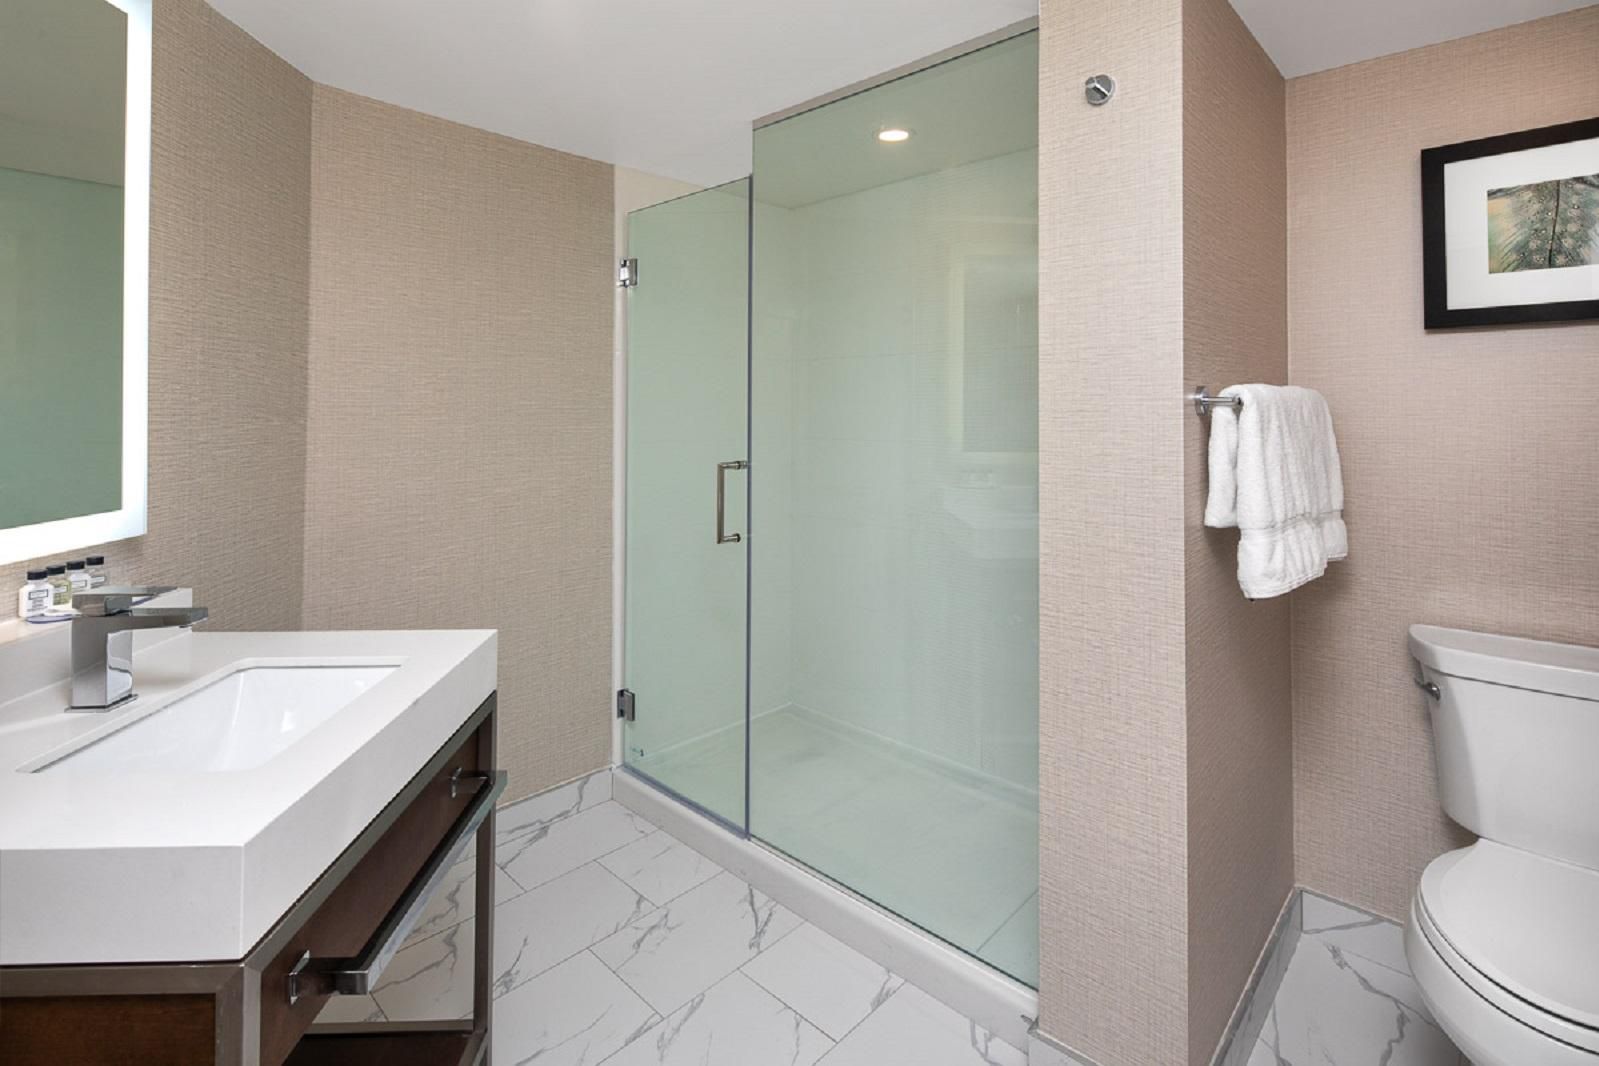 Our well appointed, spacious guest bathrooms were fully upgraded